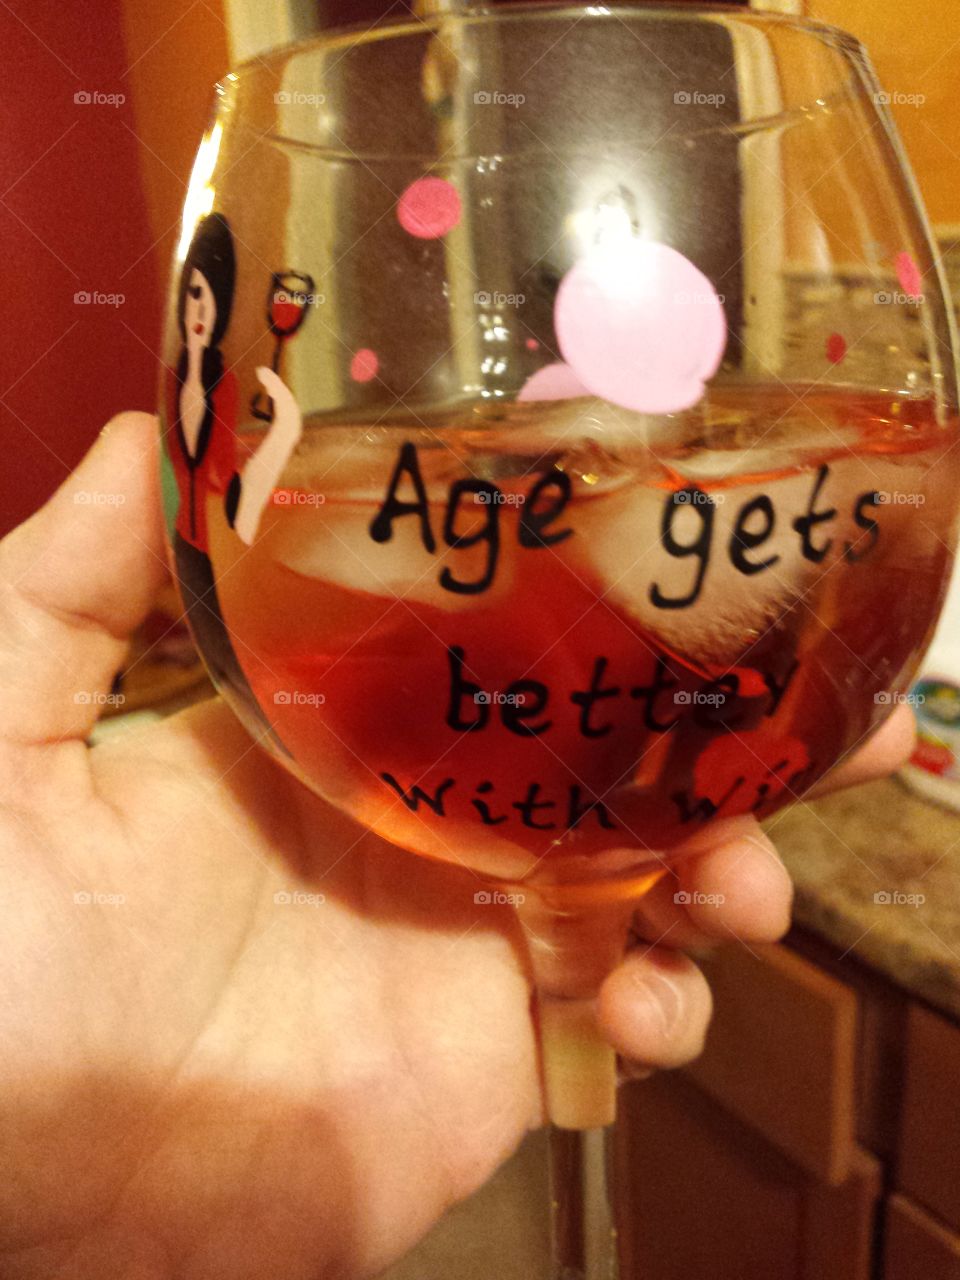 Age gets better with wine